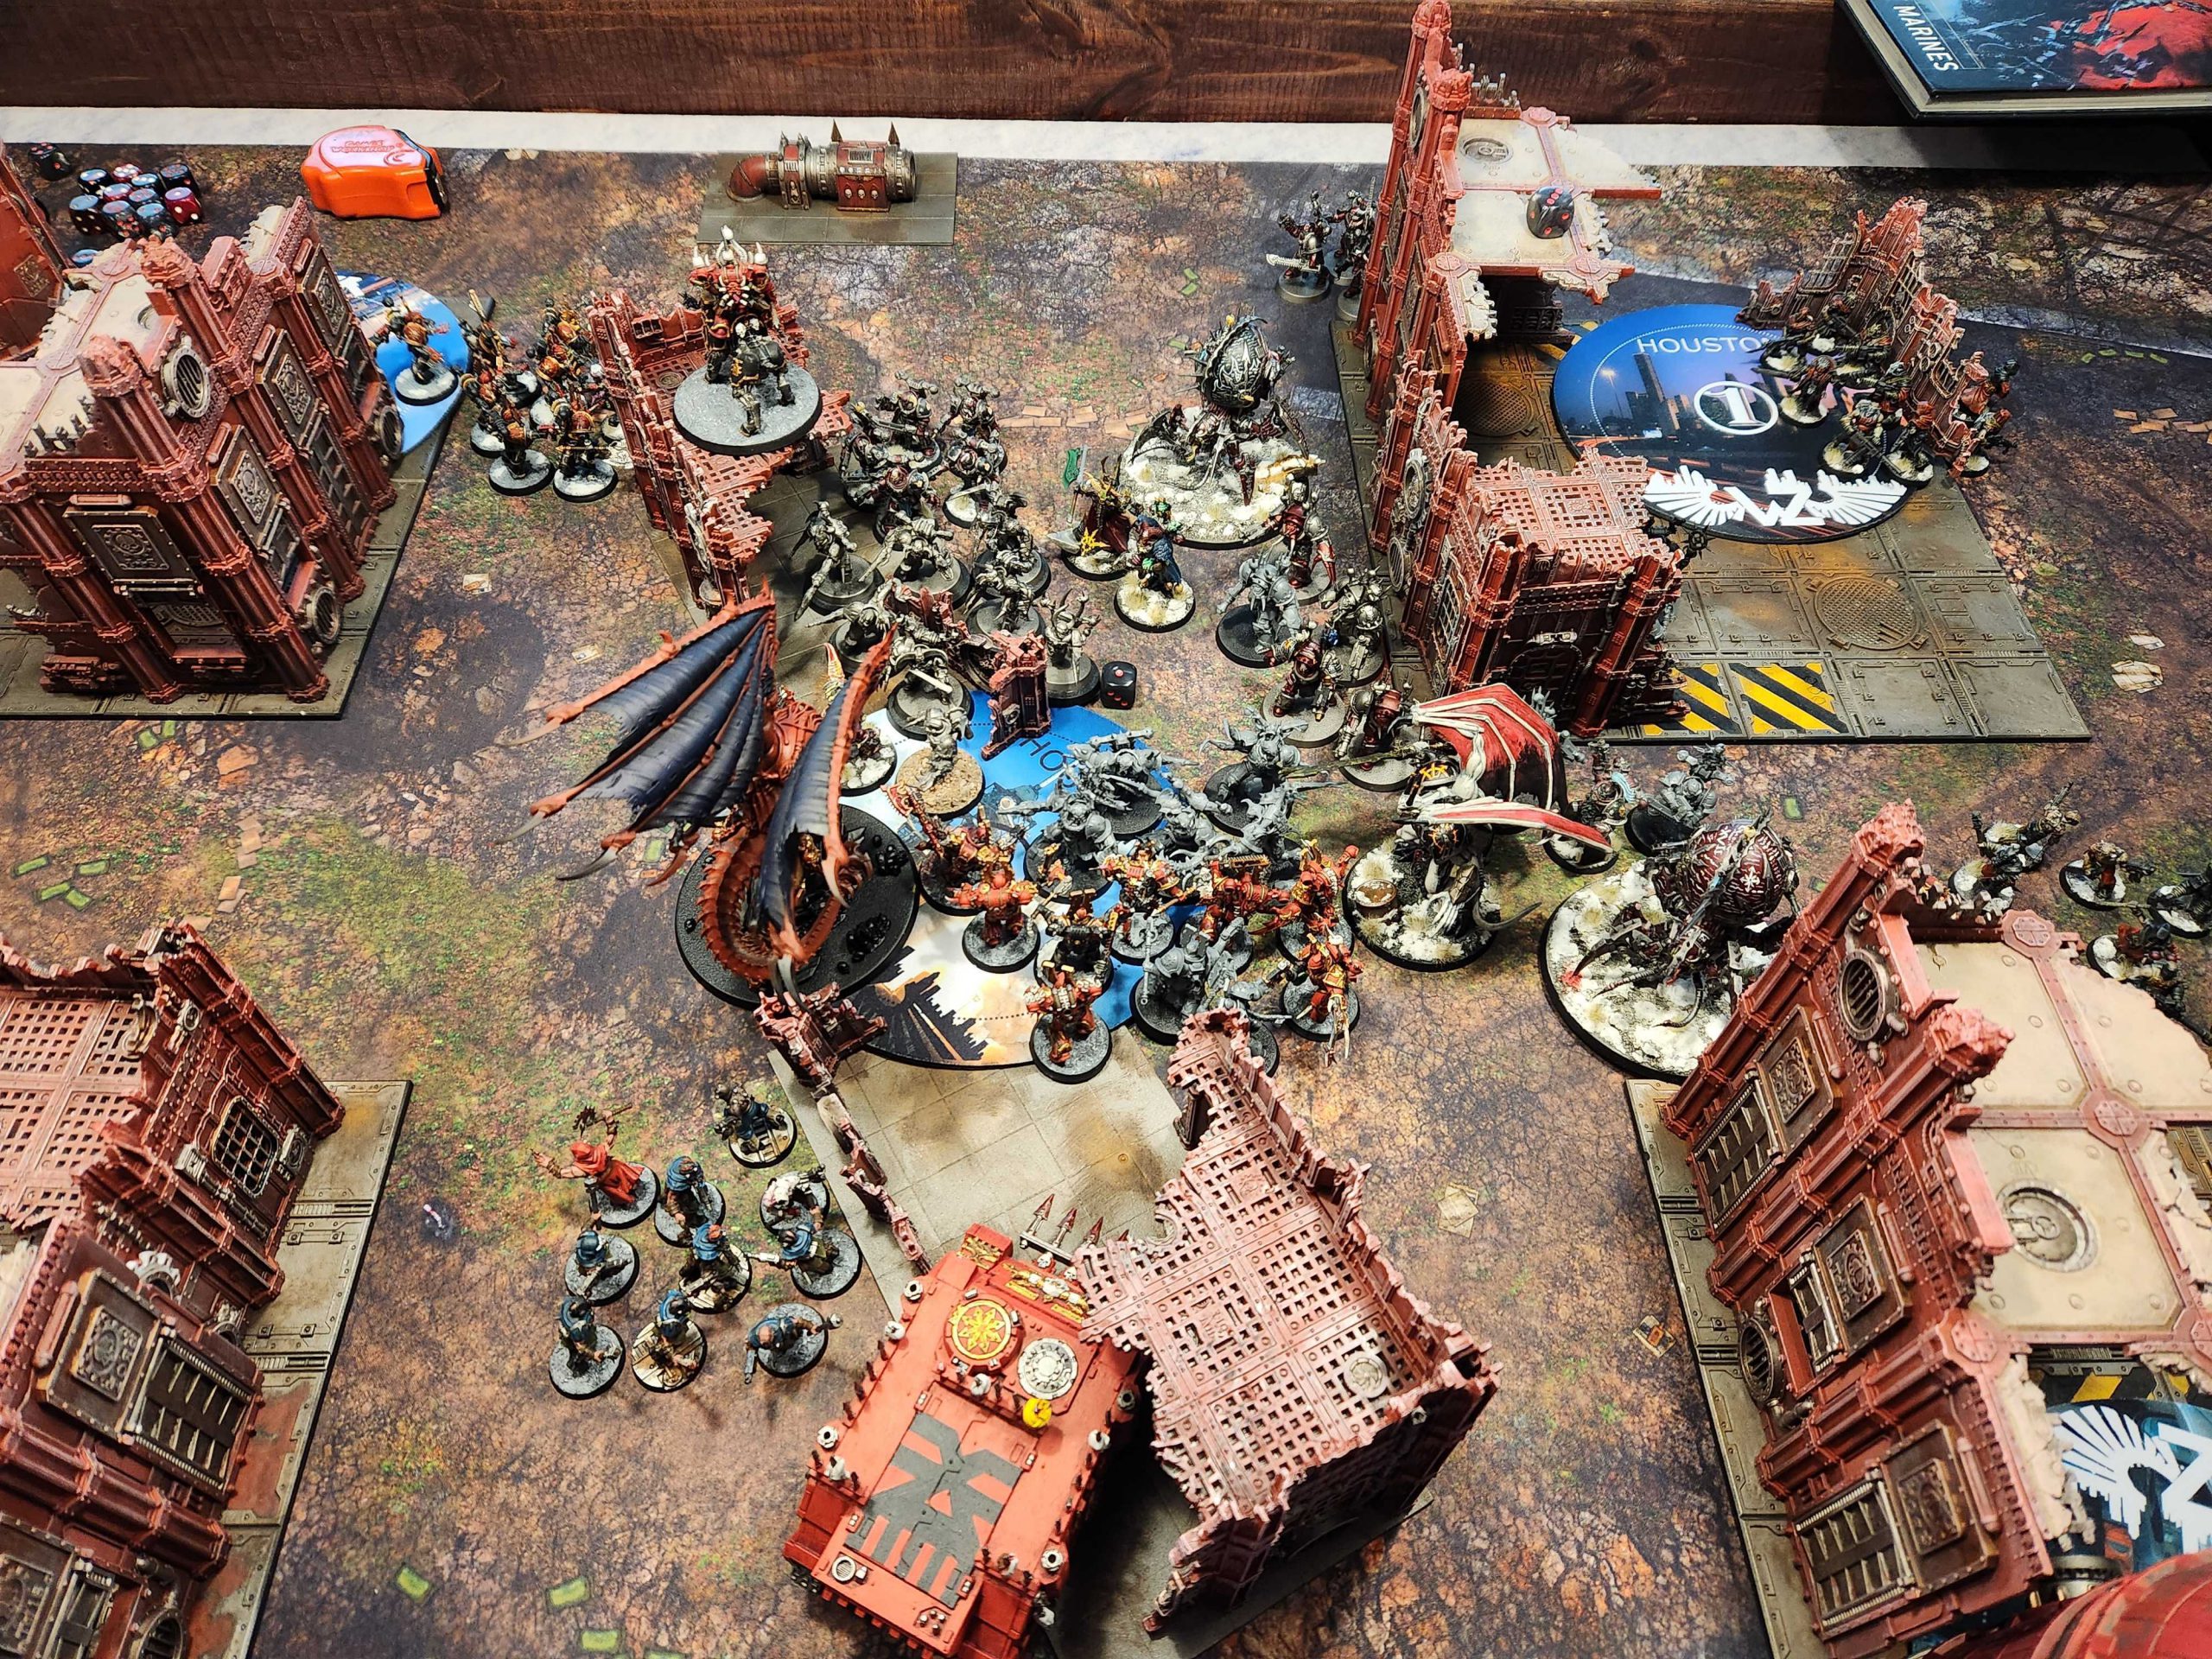 All Things Warhammer — Description: Lesson learned: Use blood for